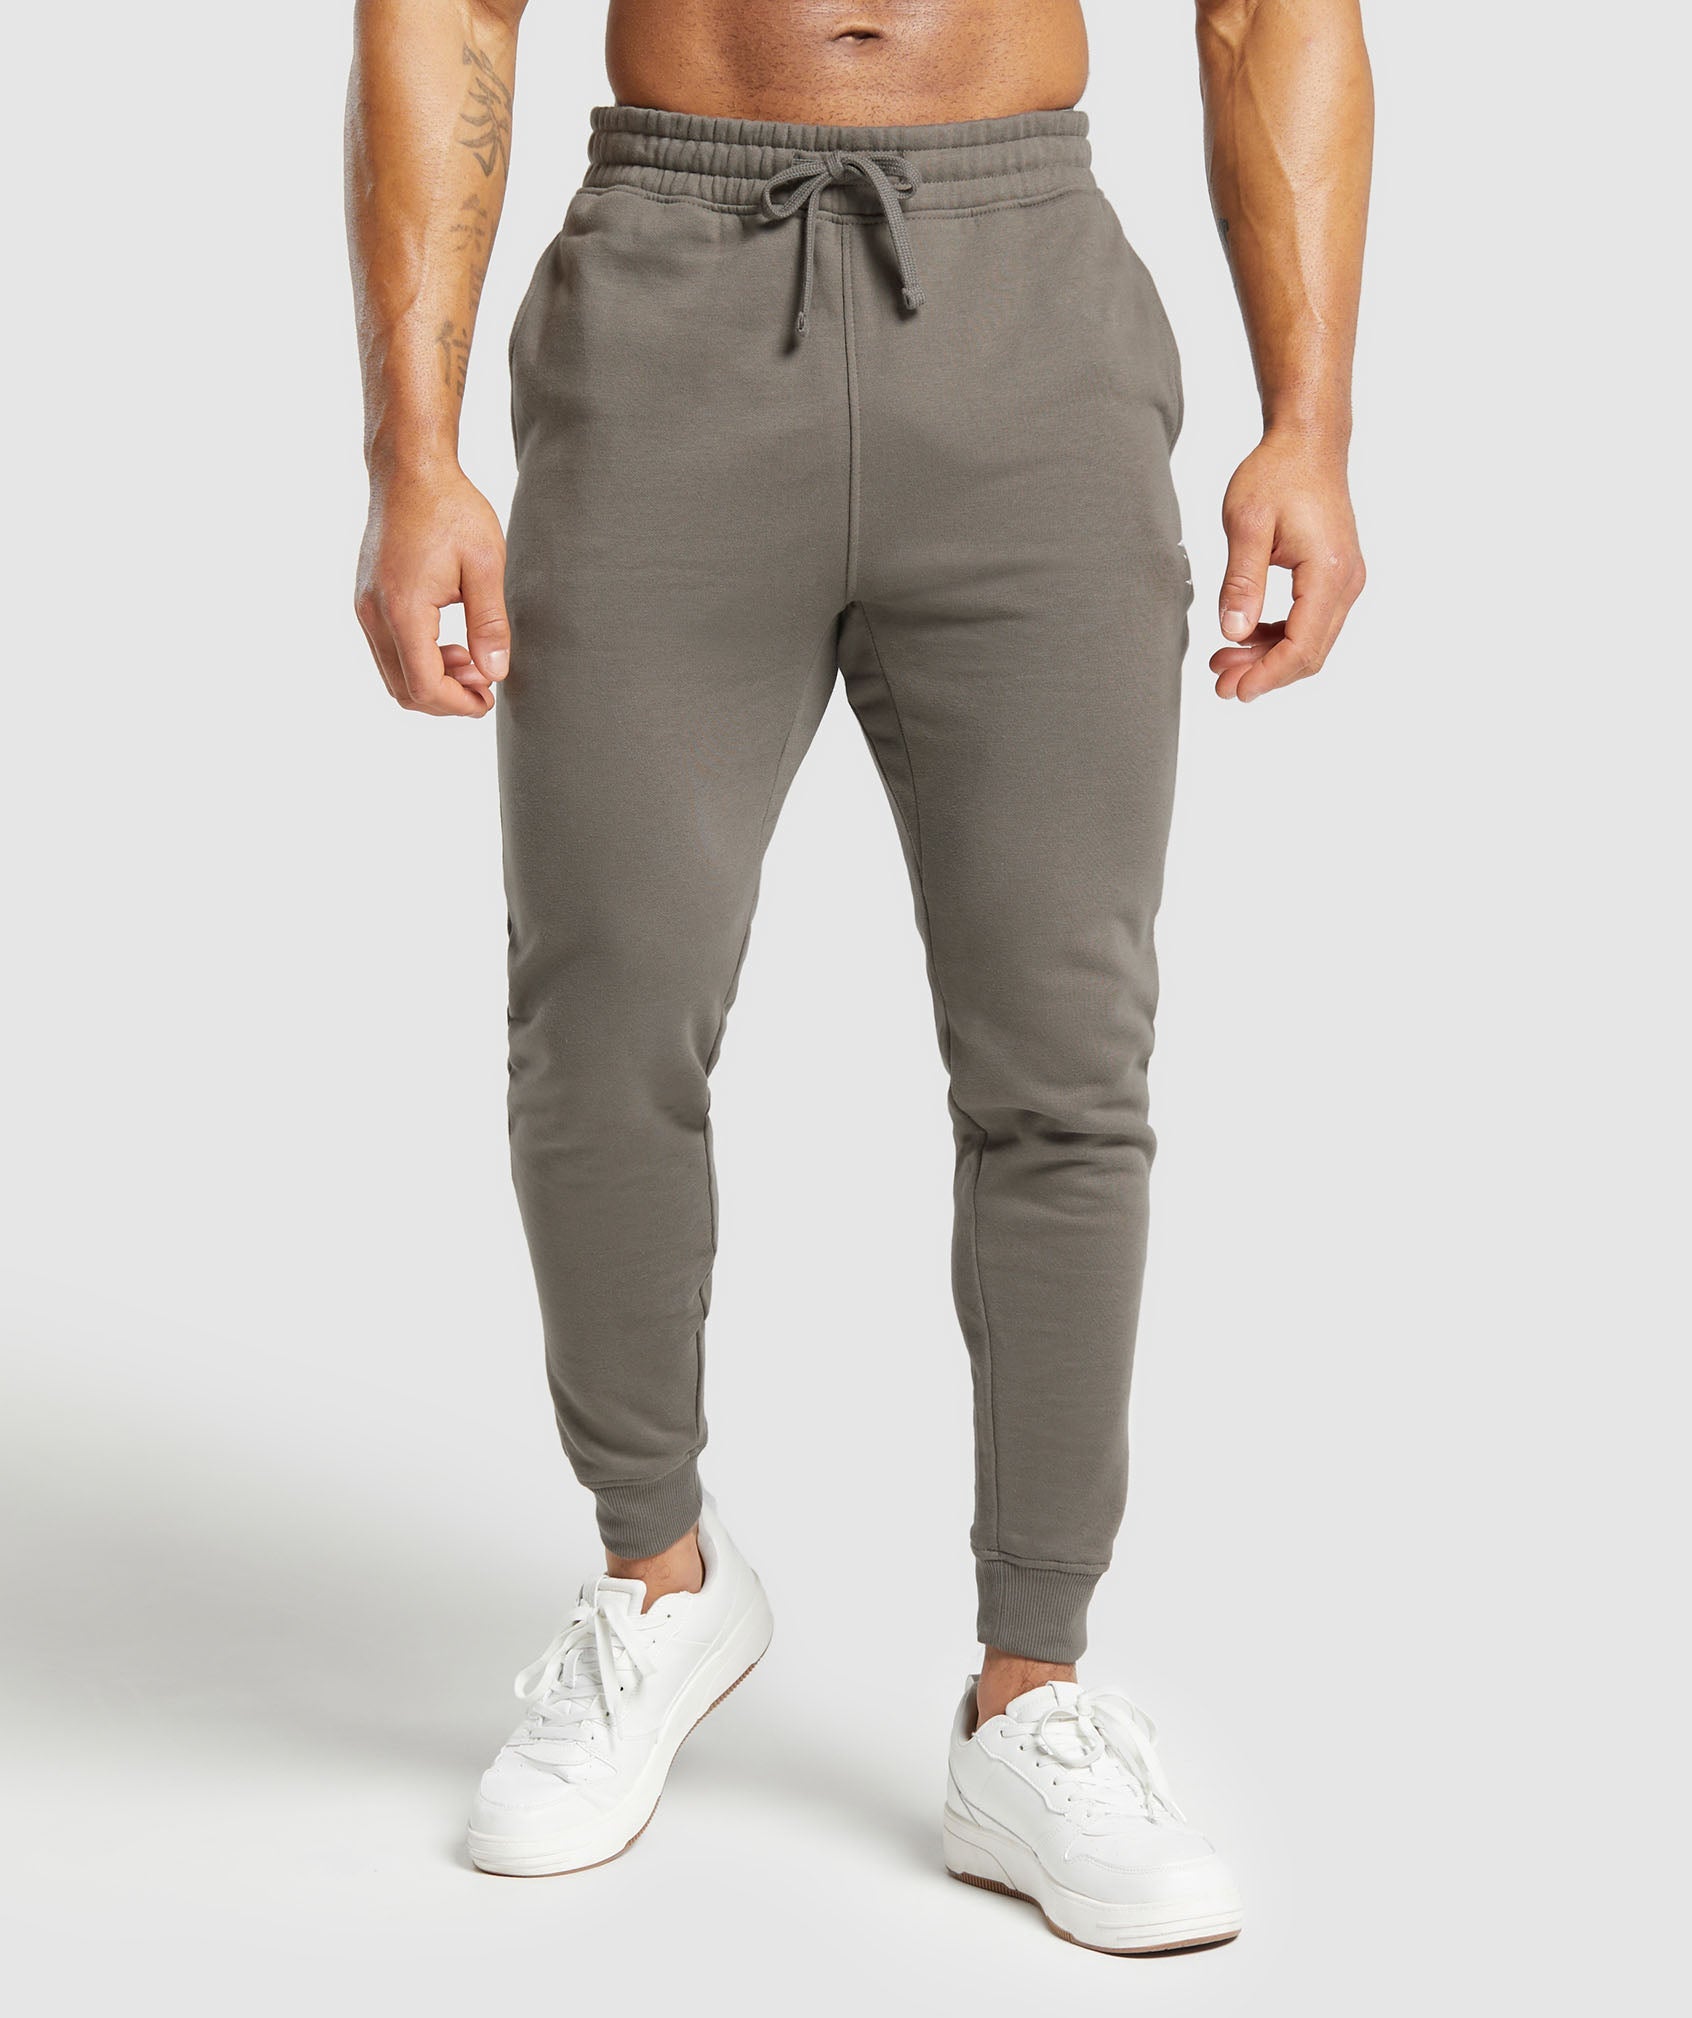 Crest Joggers in Camo Brown - view 1